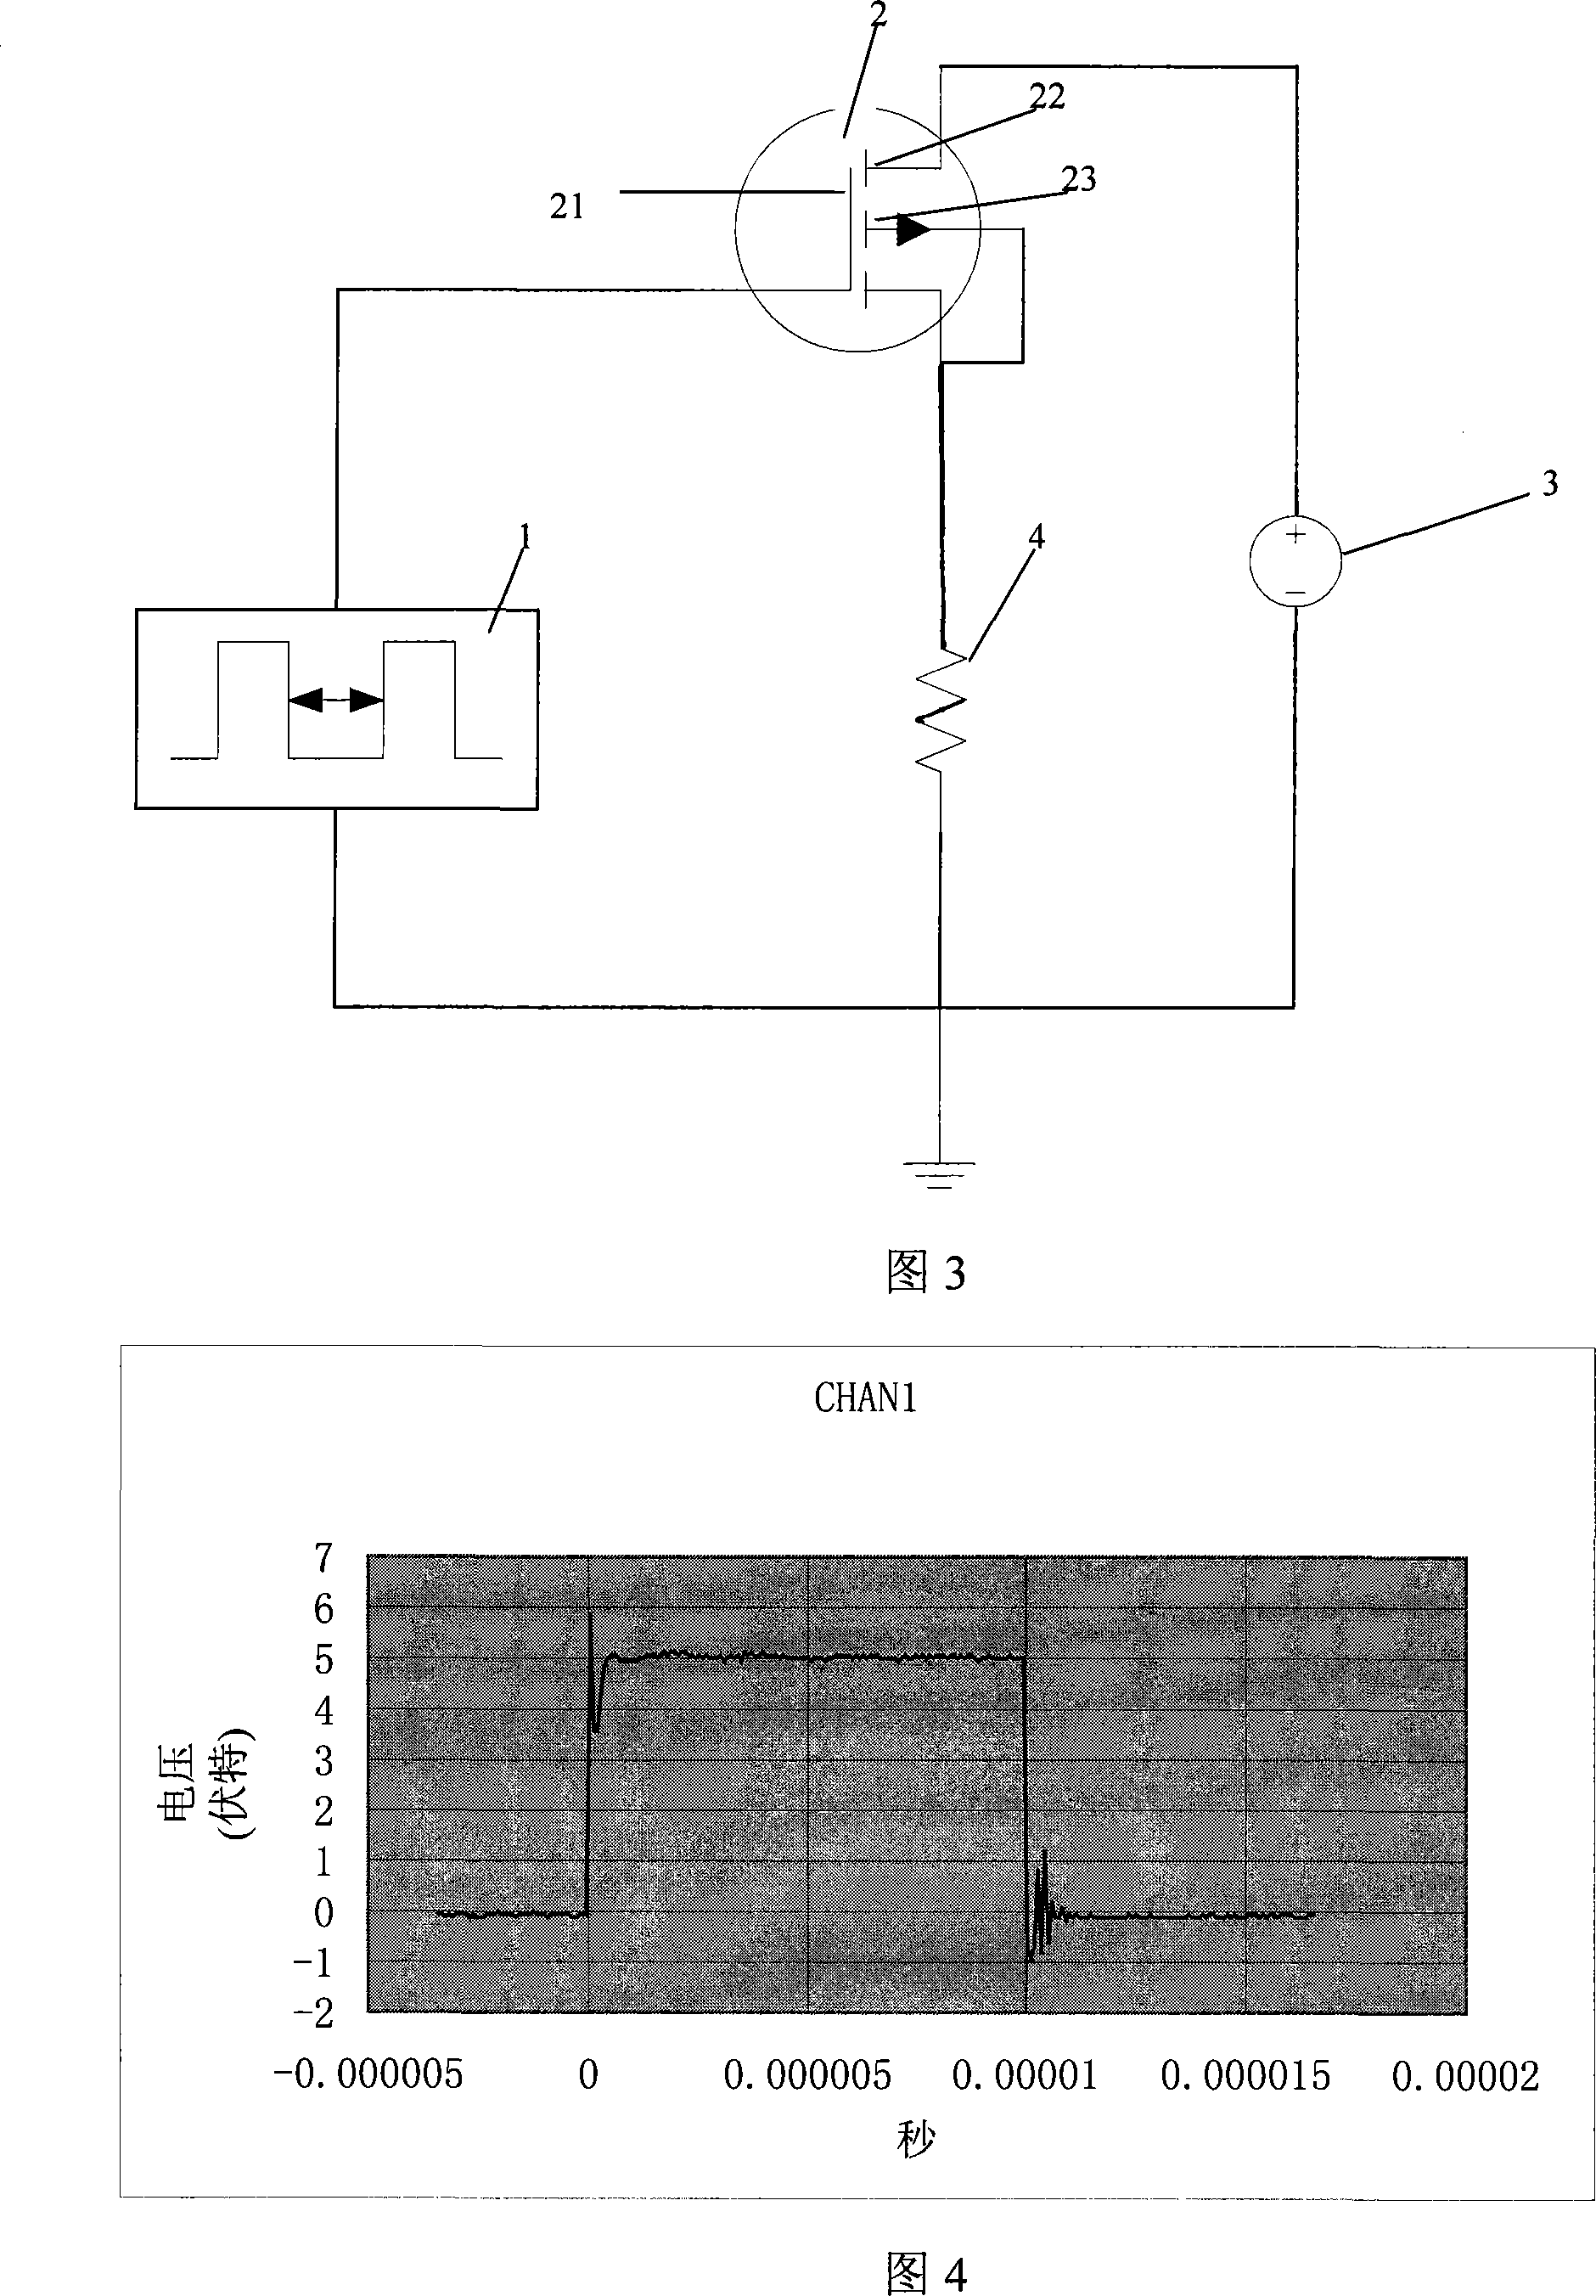 On-chip test method for microwave power amplifier chip and its test system